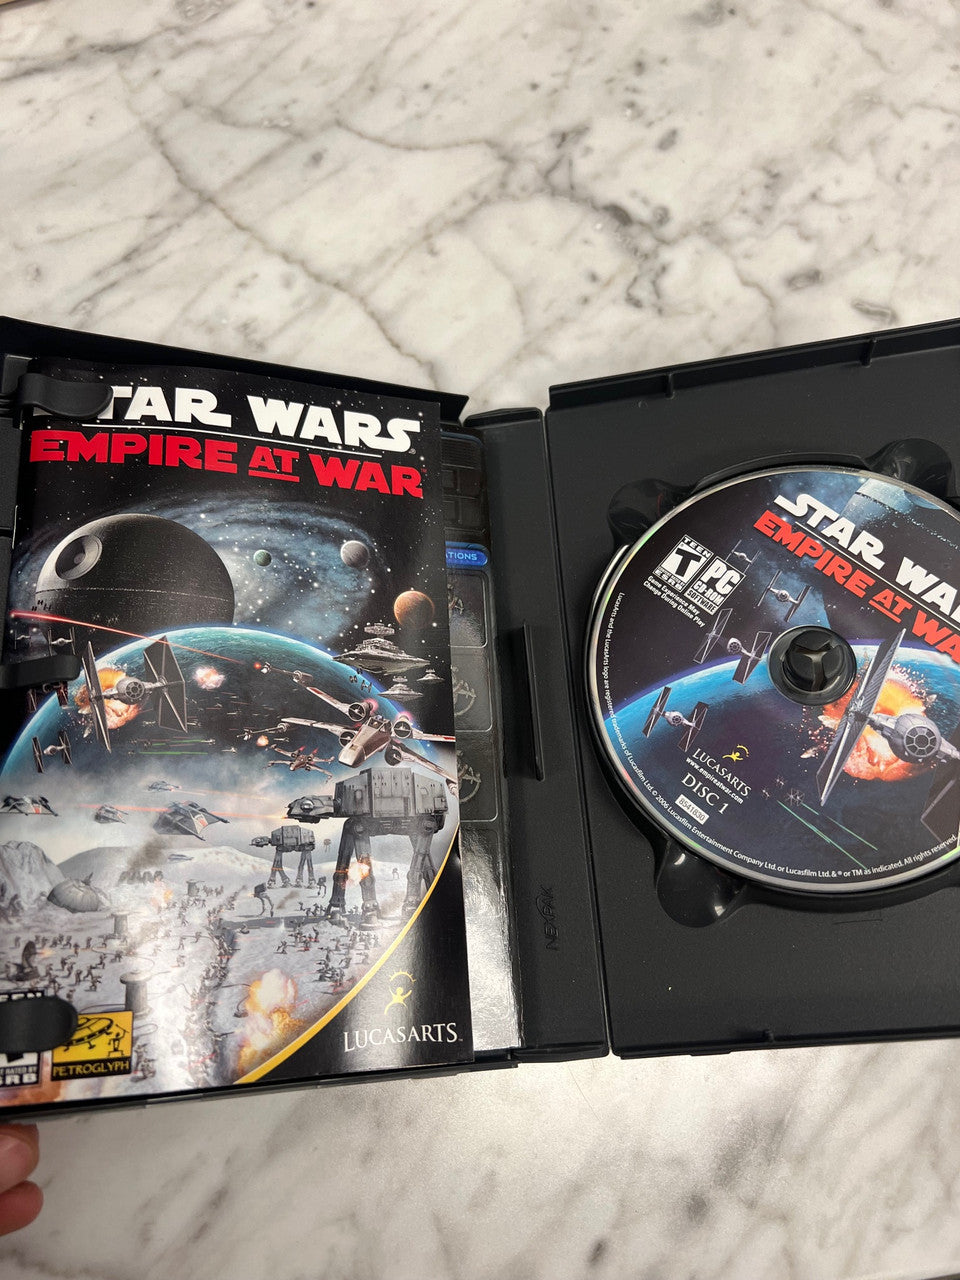 Star Wars: Empire at War PC, 2006, Complete with Manual And Guide. 2 Disc Set